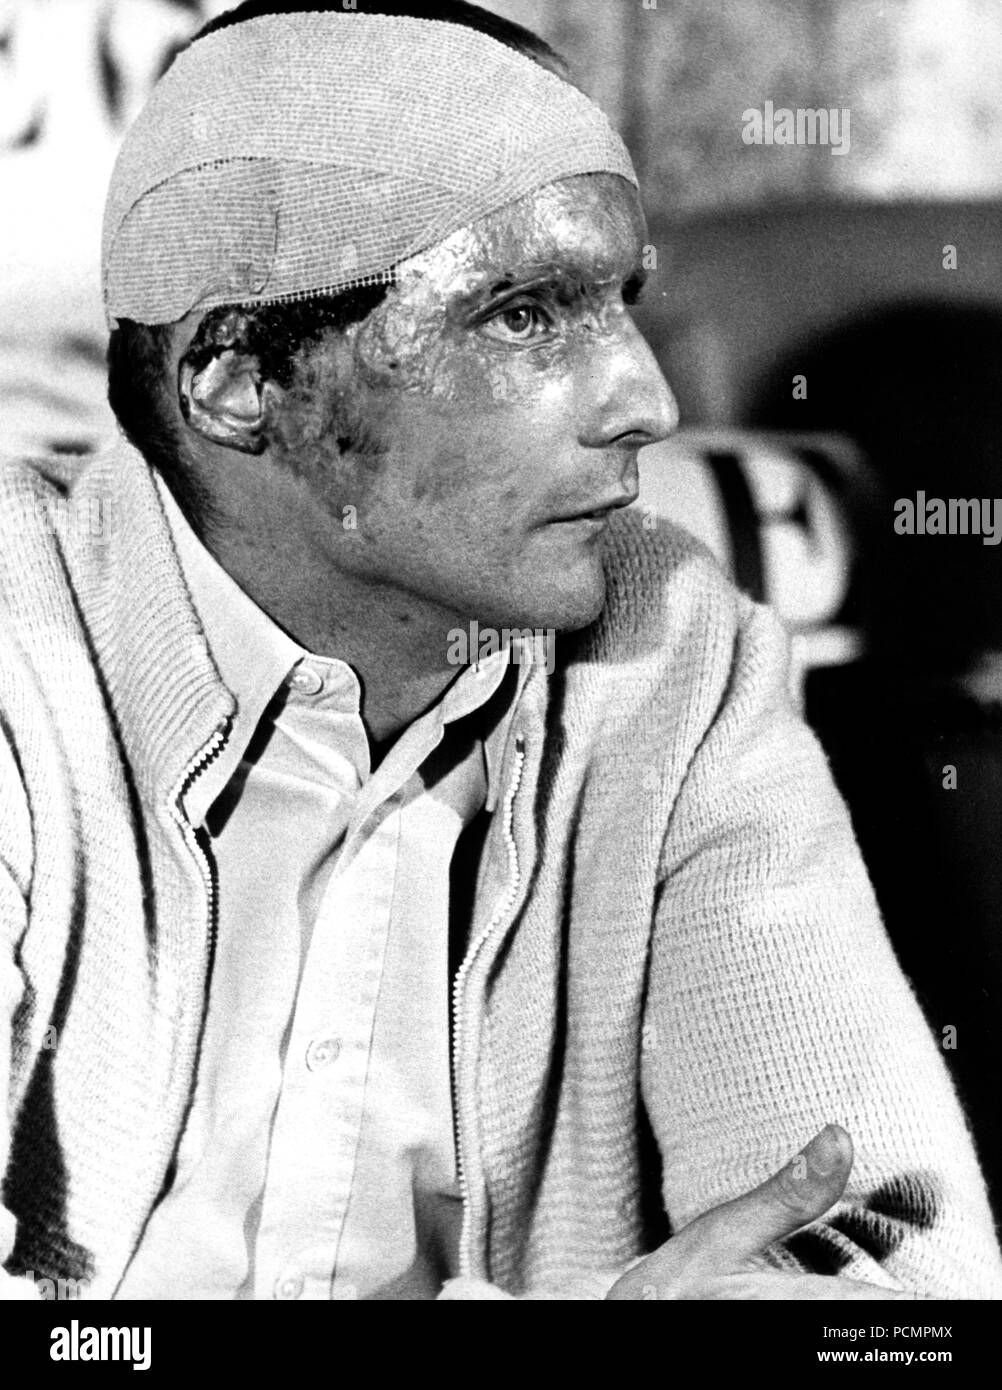 The Austrian Formula 1 driver Niki Lauda with scarred face, head bandage  and burns during a press conference in Salzburg on September 8, 1976. Lauda,  who had suffered the serious injuries in